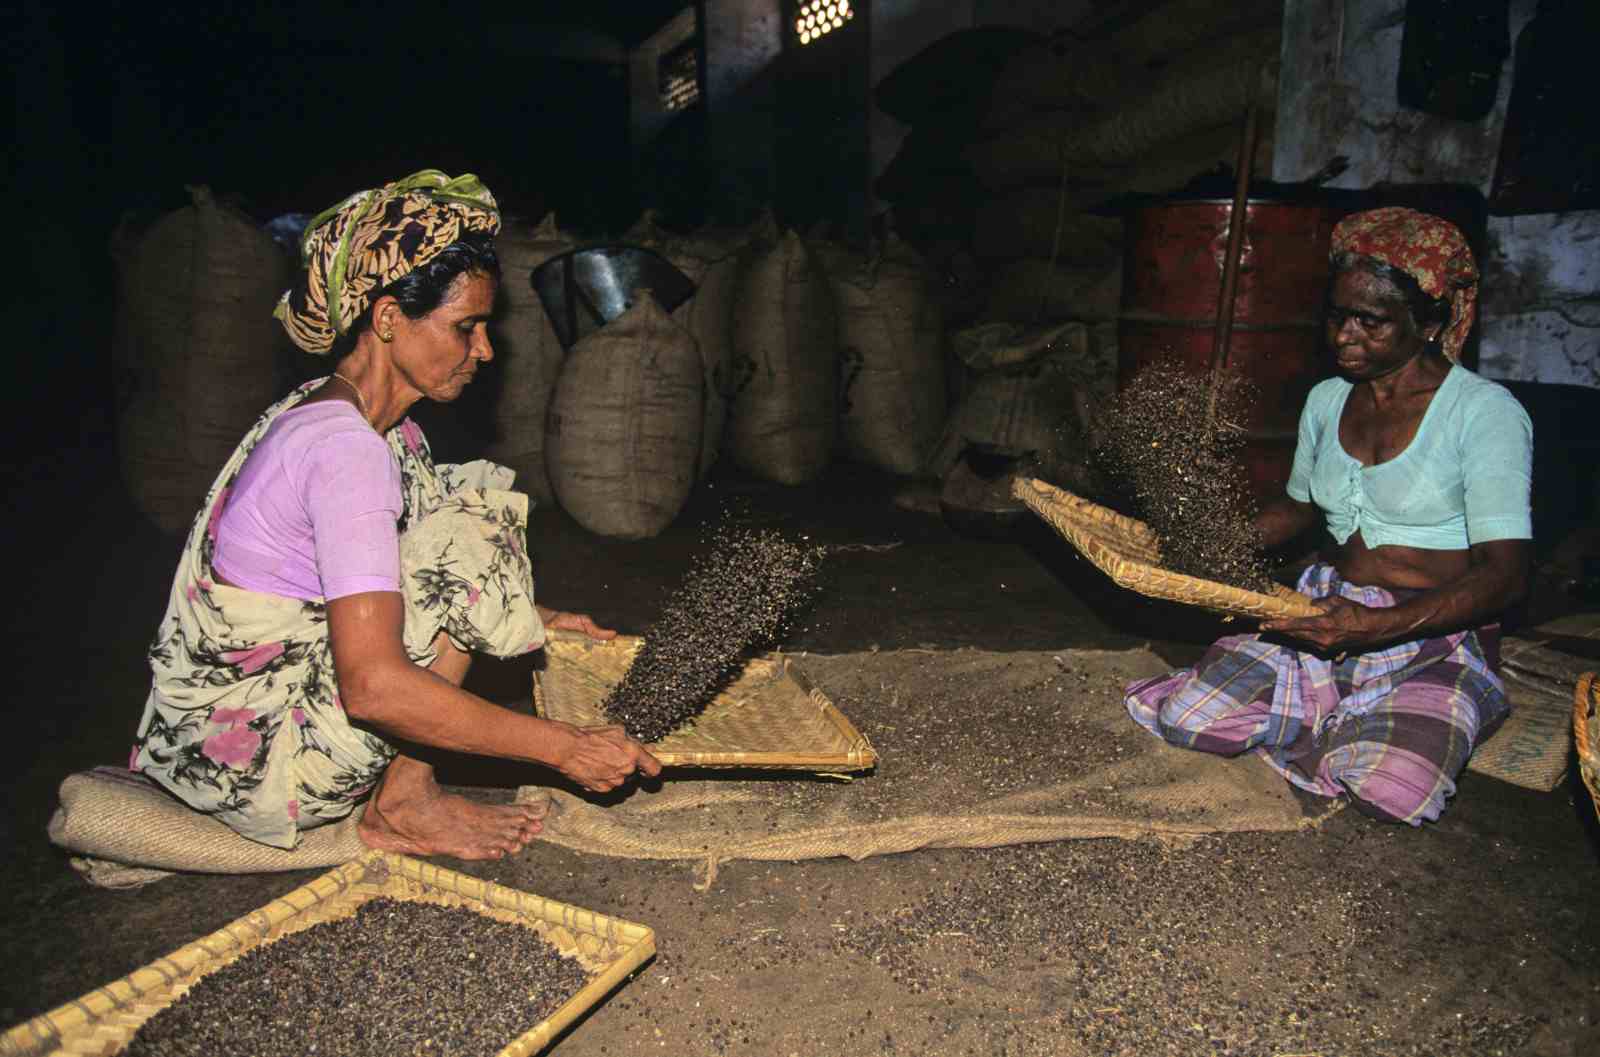 Calicut, India has a long spice trading history, exporting black pepper and other spices (Soltan Frédéric/Sygma via Getty Images)